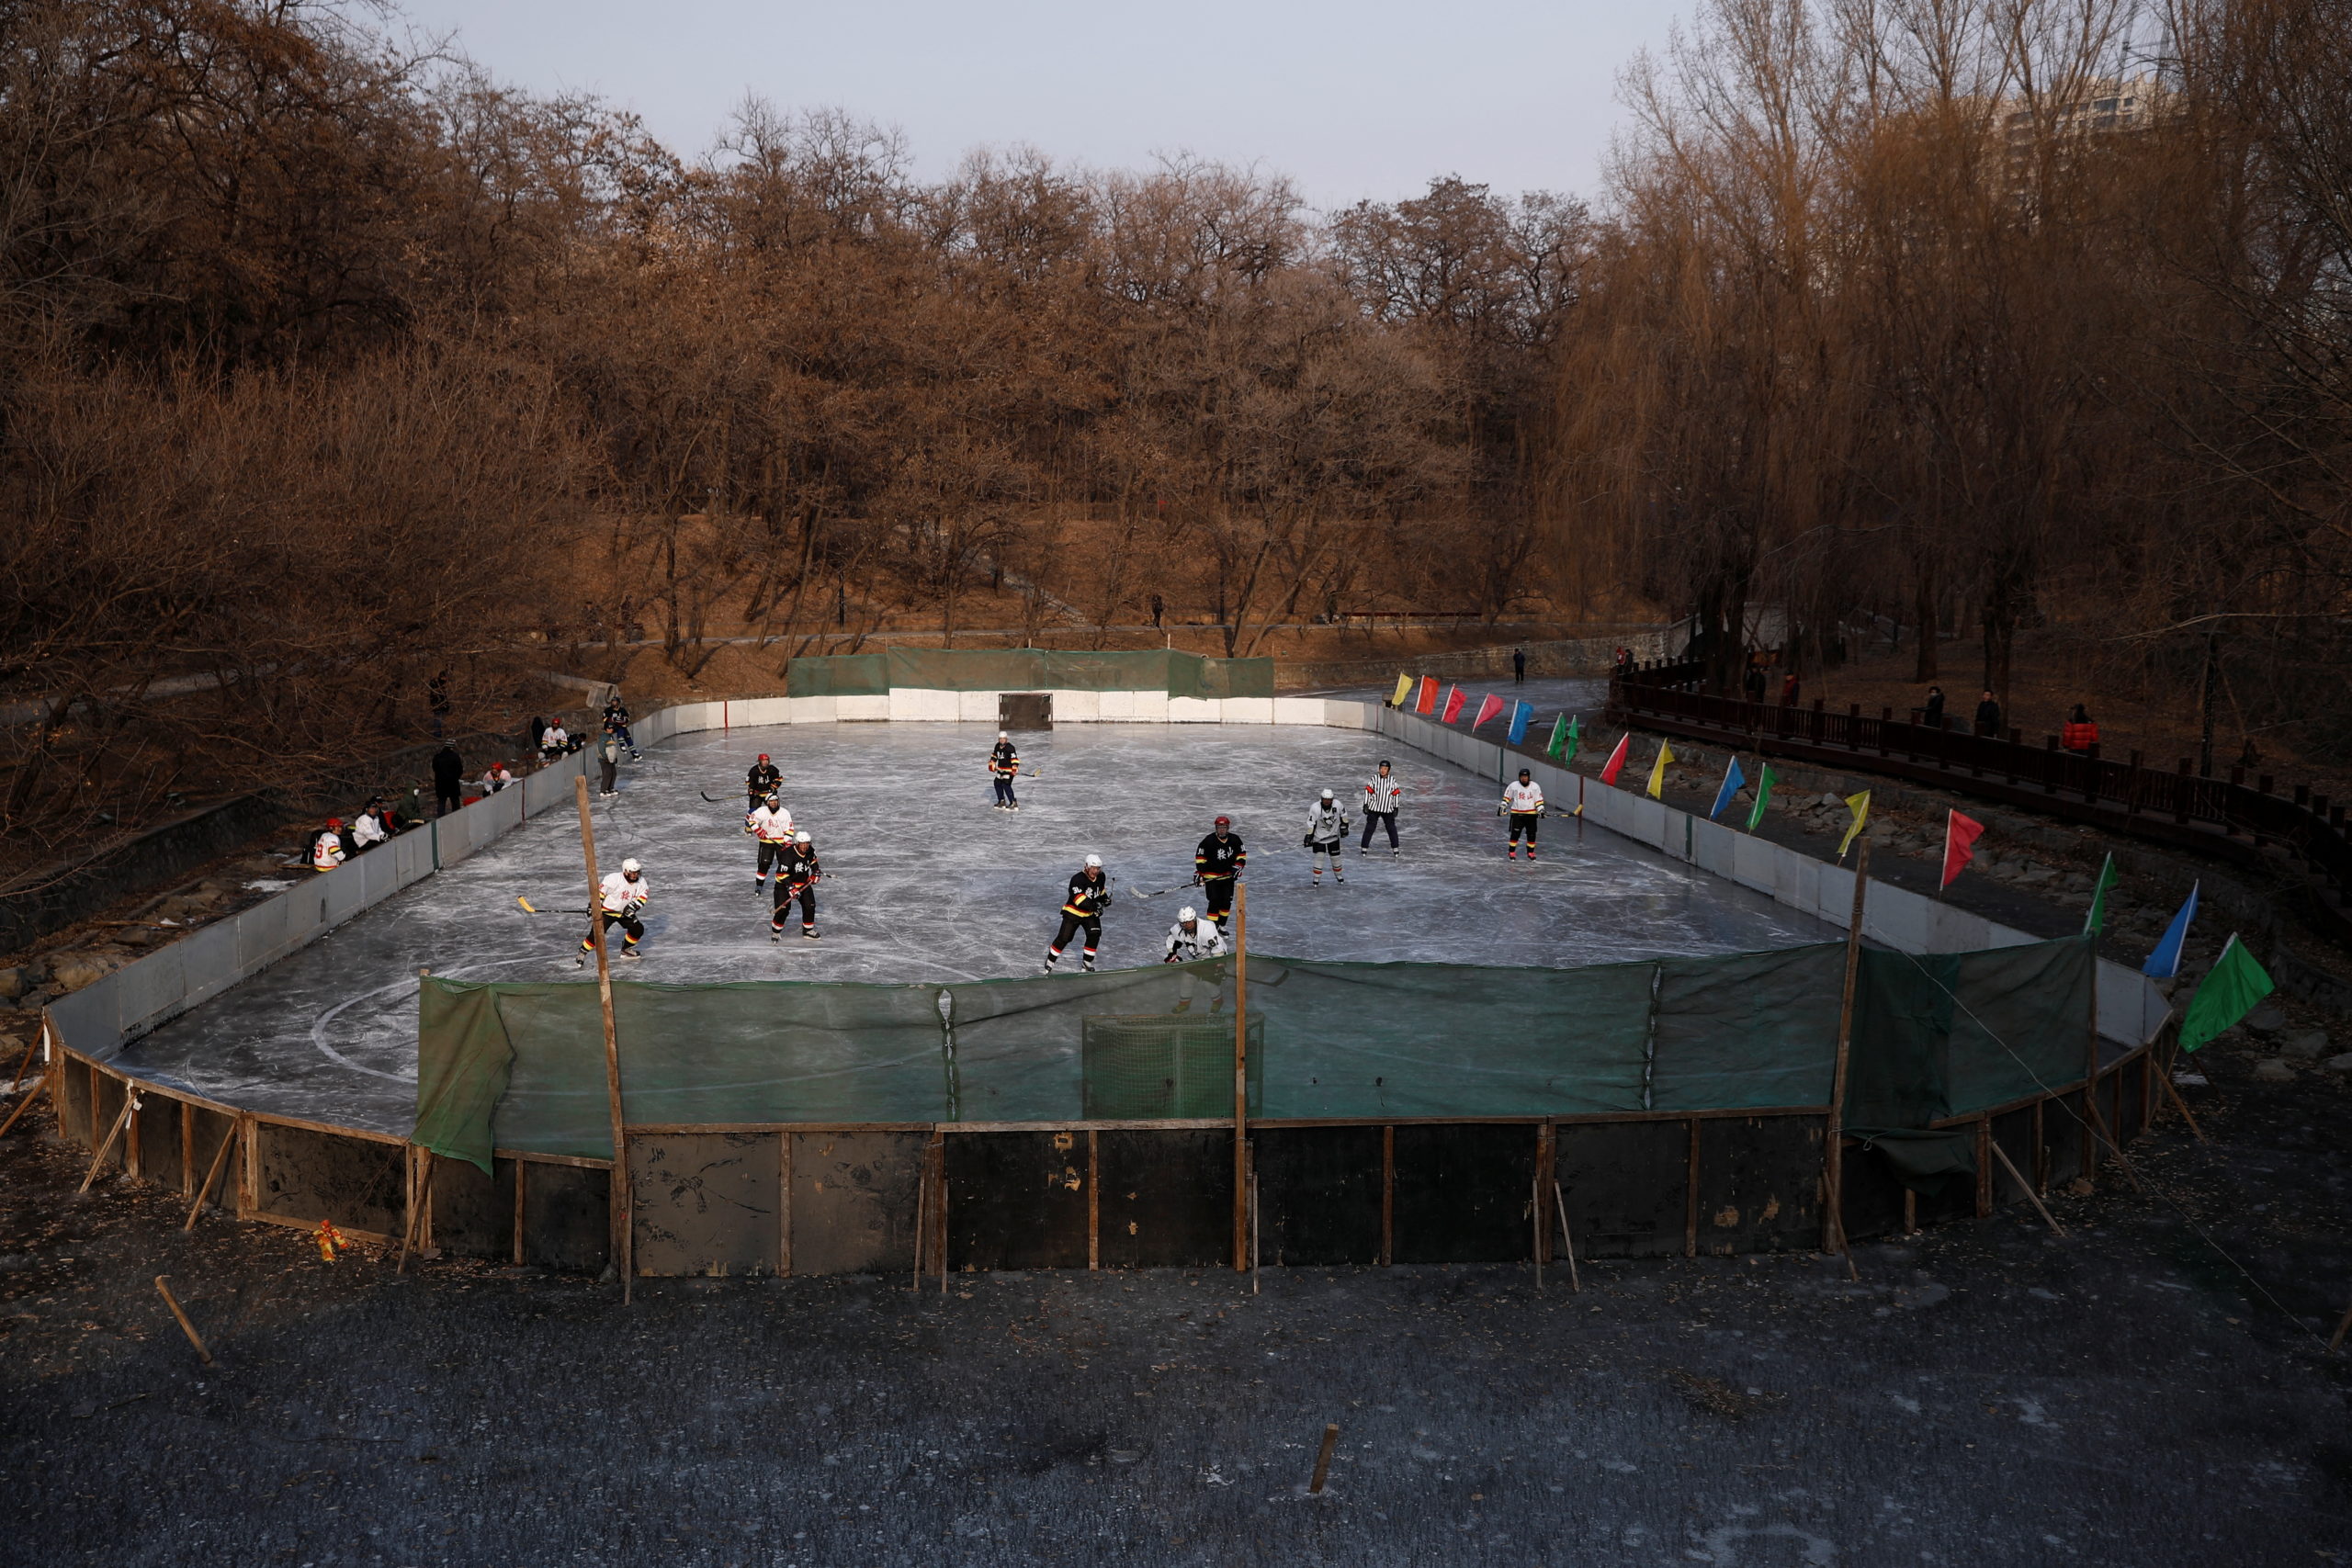 ICYMI – Awaiting a face-off, from amateur hockey players in China to Russian military drills near Ukraine